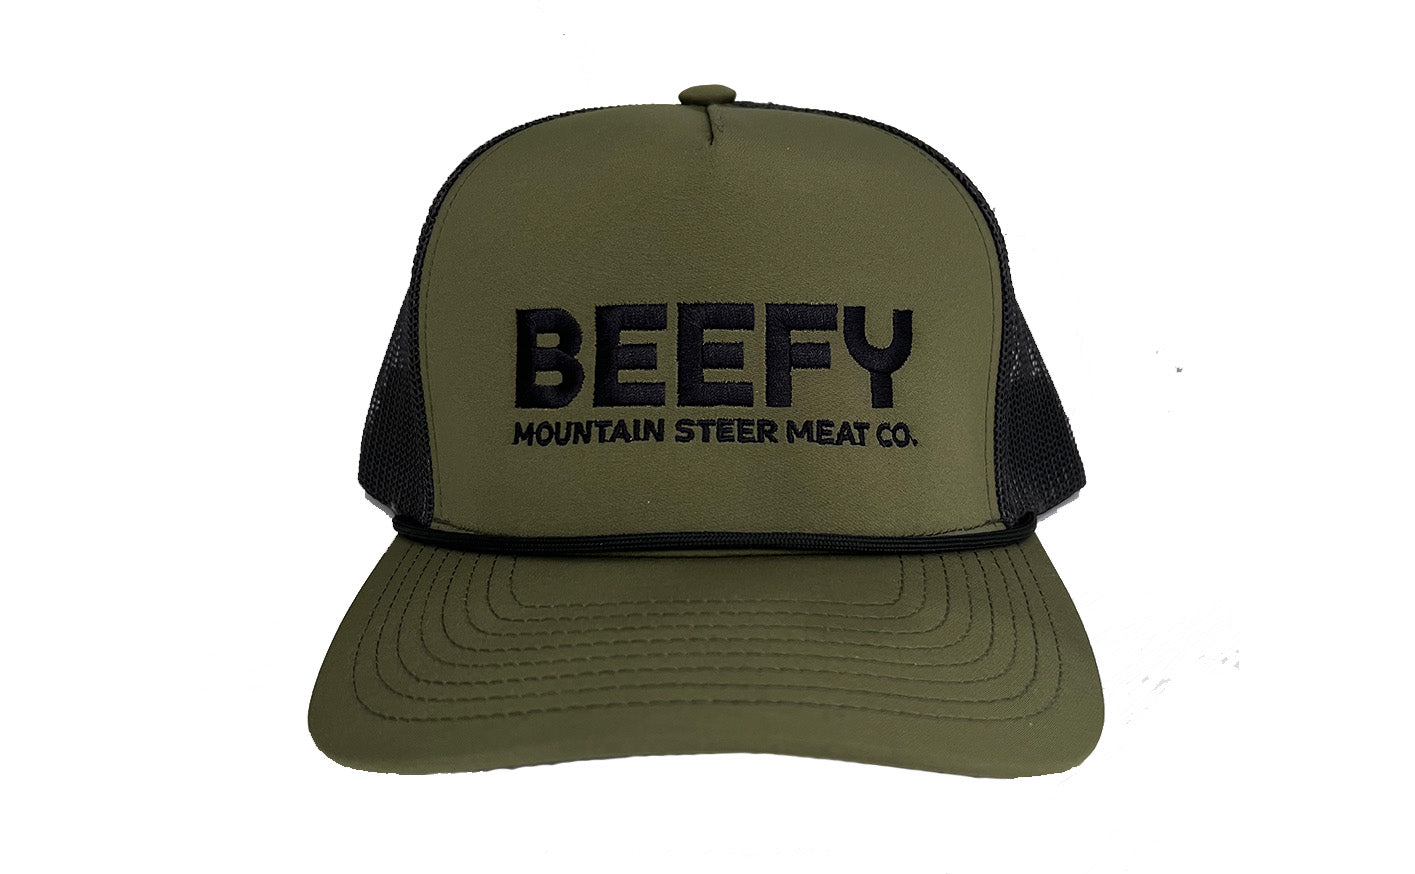 "Beefy" Mountain Steer Meat Co. Hat - Olive & Black